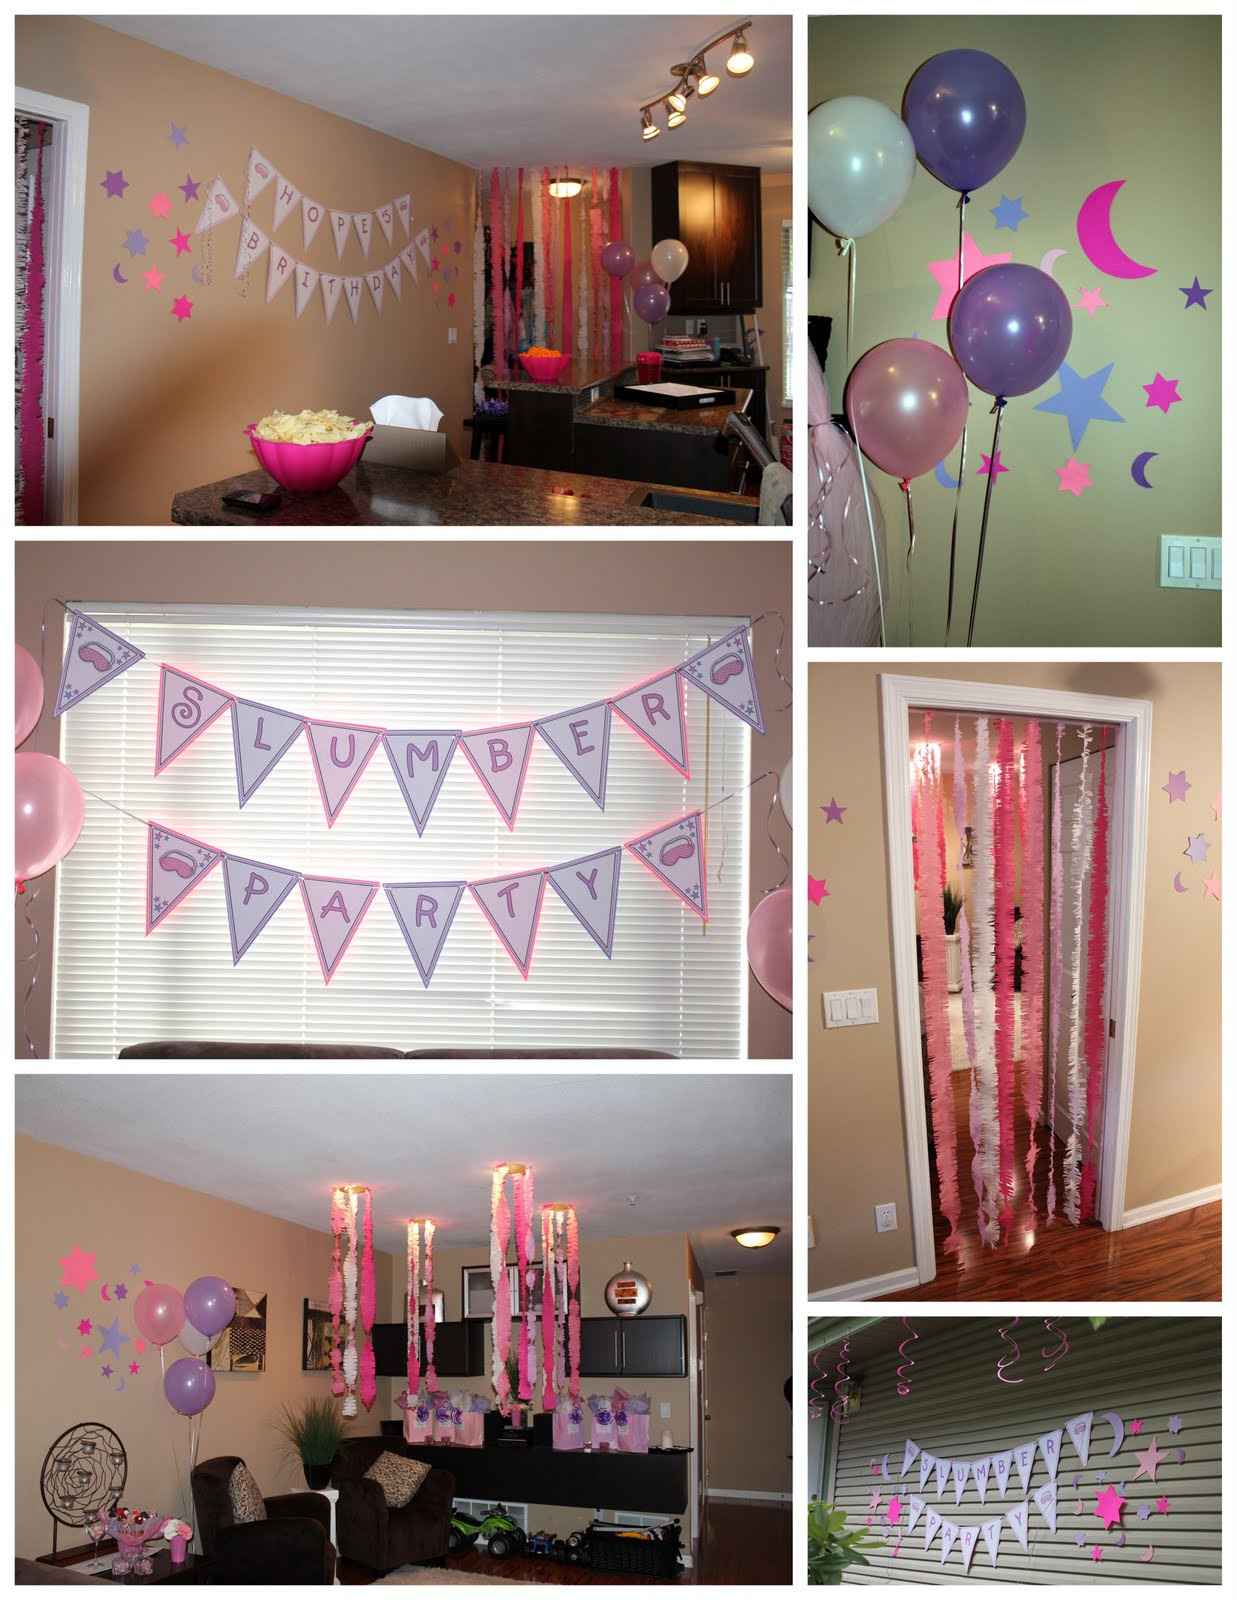 Birthday Party Sleepover Ideas
 Shannon s Shenanigans My First Post Slumber Party